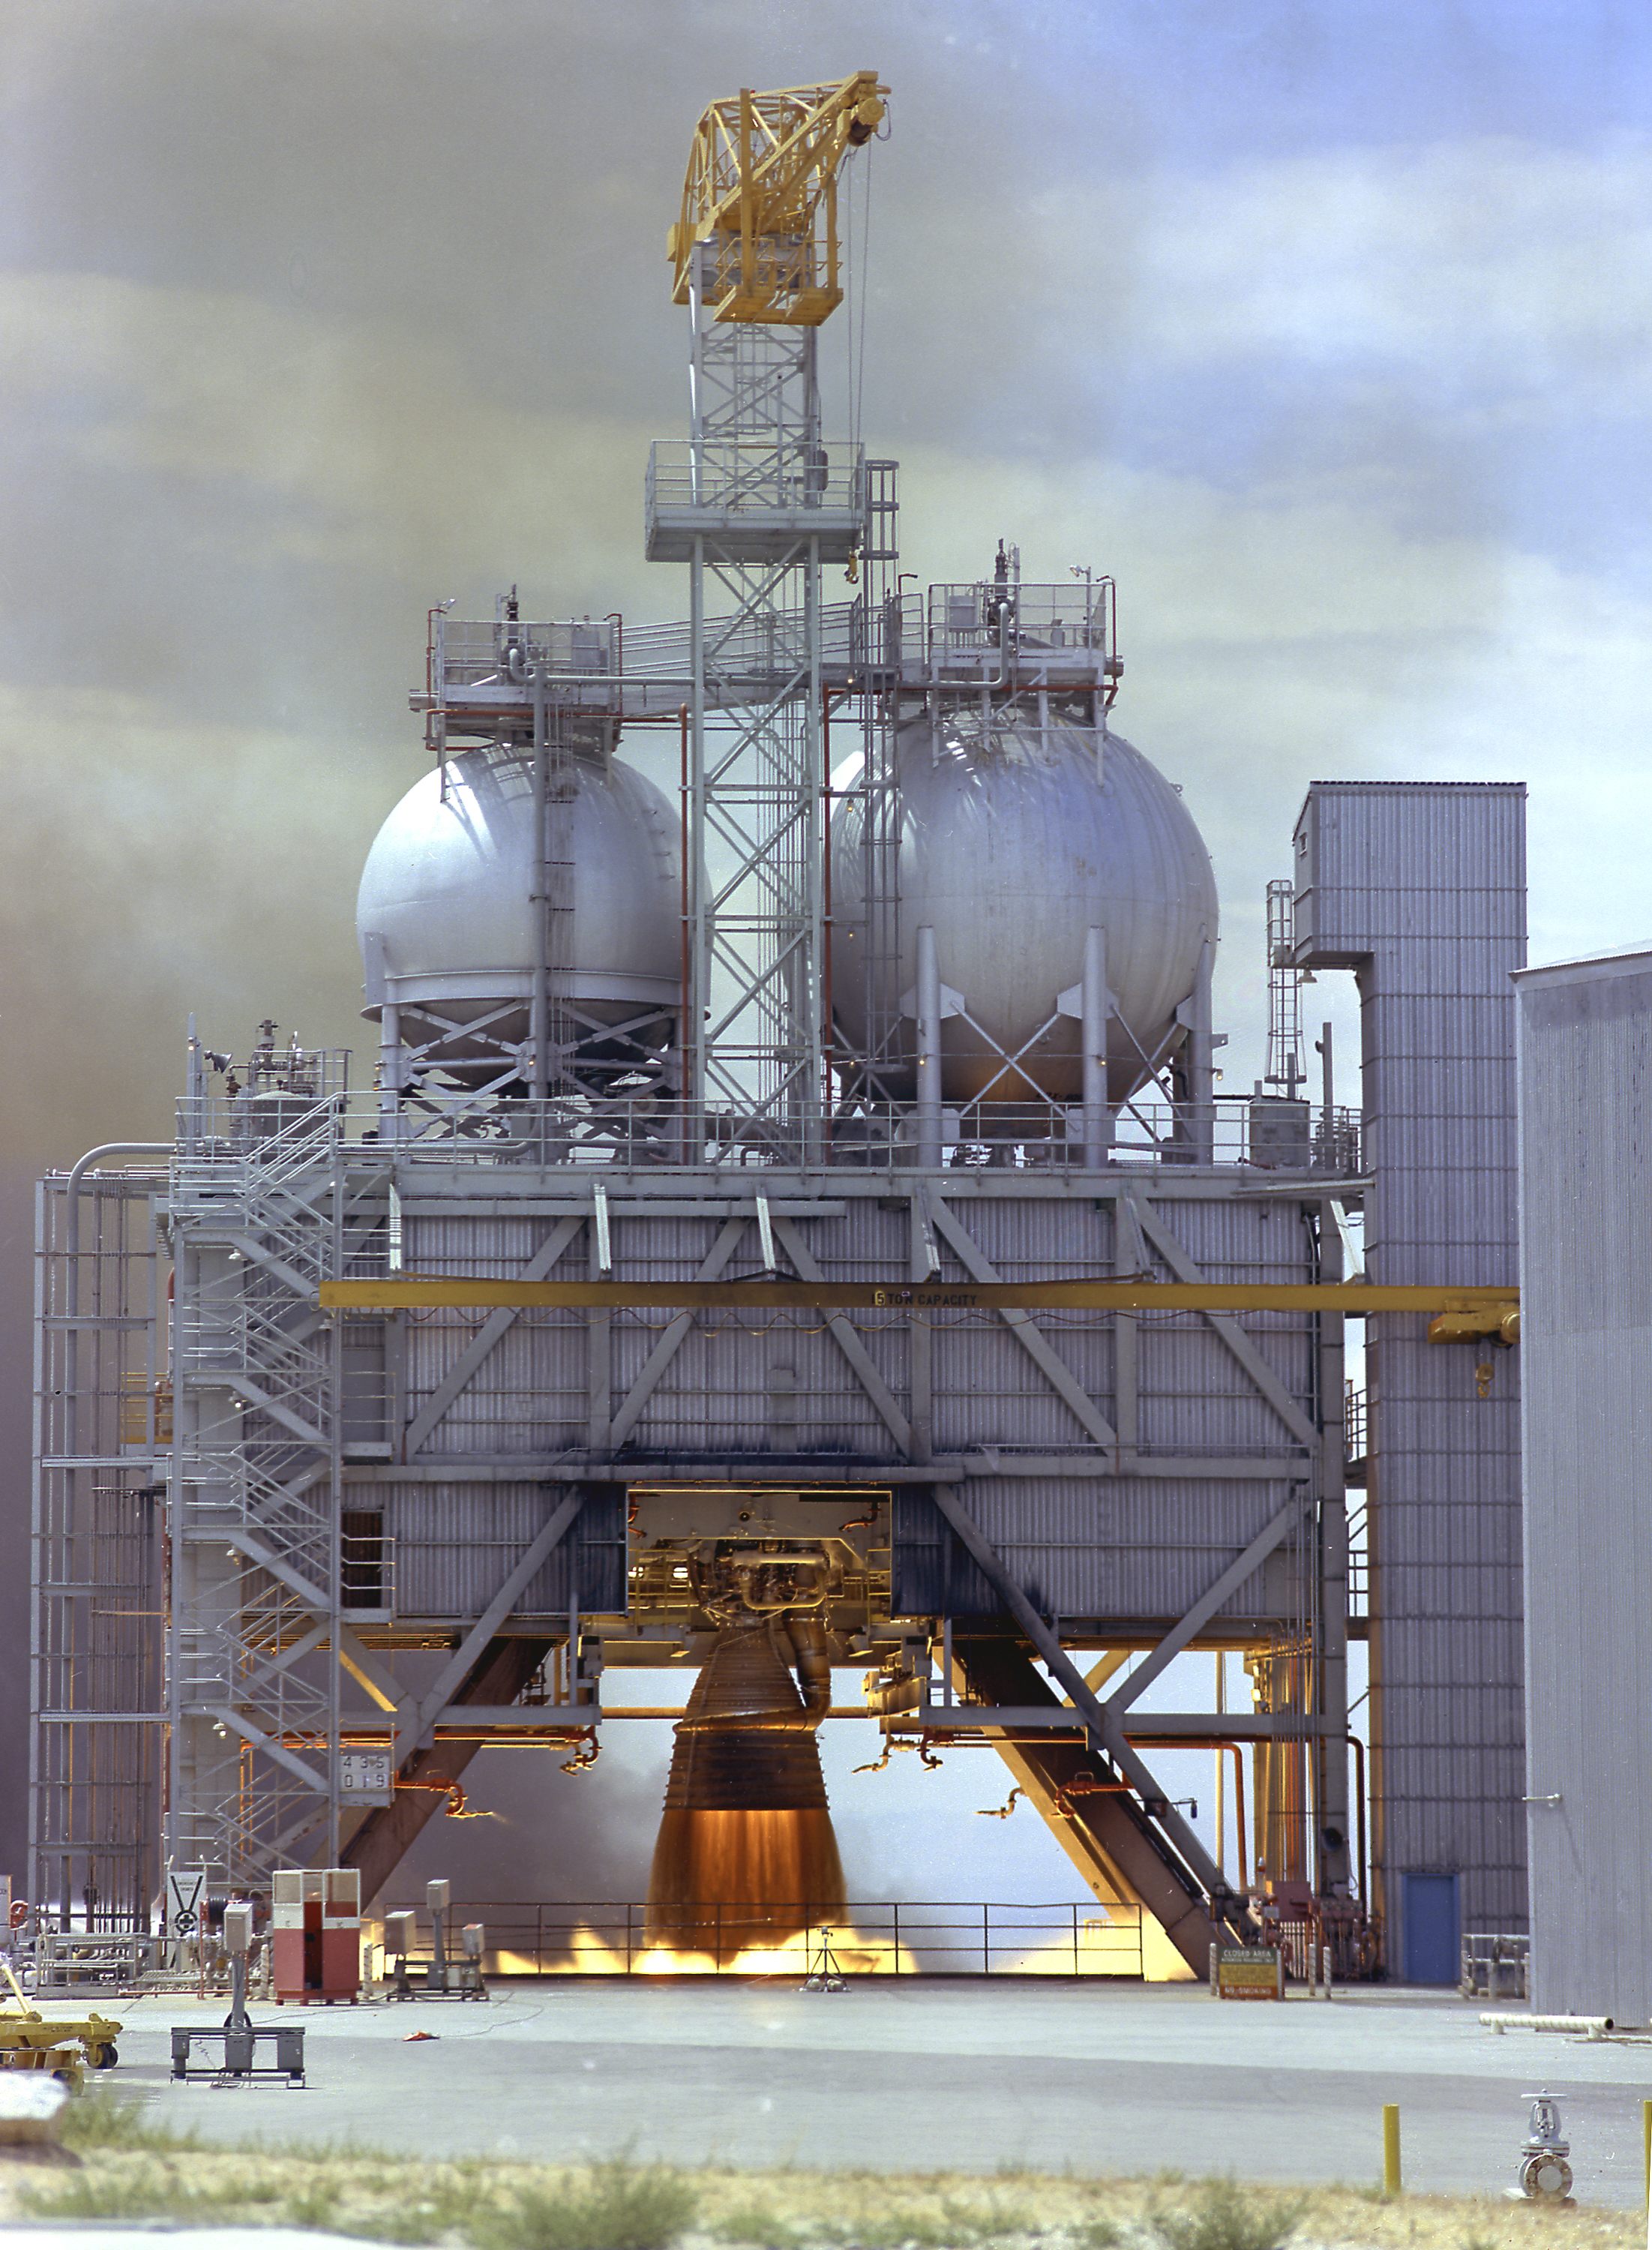 Test Firing of an F-1 Engine at Edwards Air Force Base in 1960. The F-1 engine was developed and built by Rocketdyne under the direction of the Marshall Space Flight Center. It measured 19 feet tall by 12.5 feet at the nozzle exit, and produced a 1,500,000-pound thrust using liquid oxygen and kerosene as the propellant. The image shows an F-1 engine being test fired at the Test Stand 1-C at the Edwards Air Force Base in Californoa. Photo via Wikipedia.